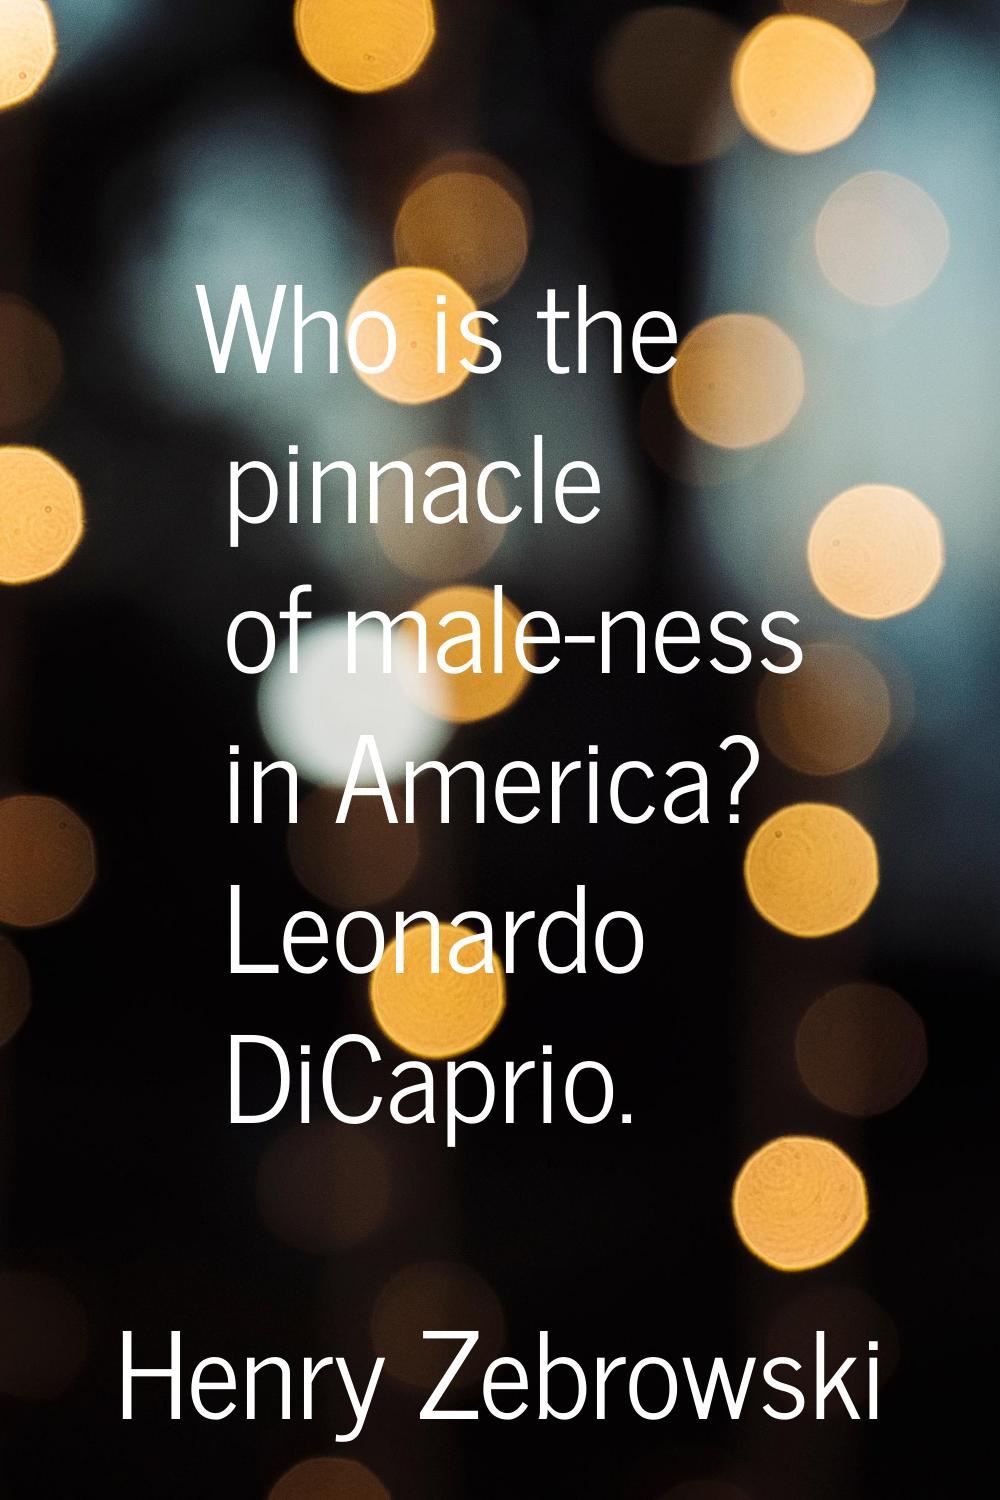 Who is the pinnacle of male-ness in America? Leonardo DiCaprio.